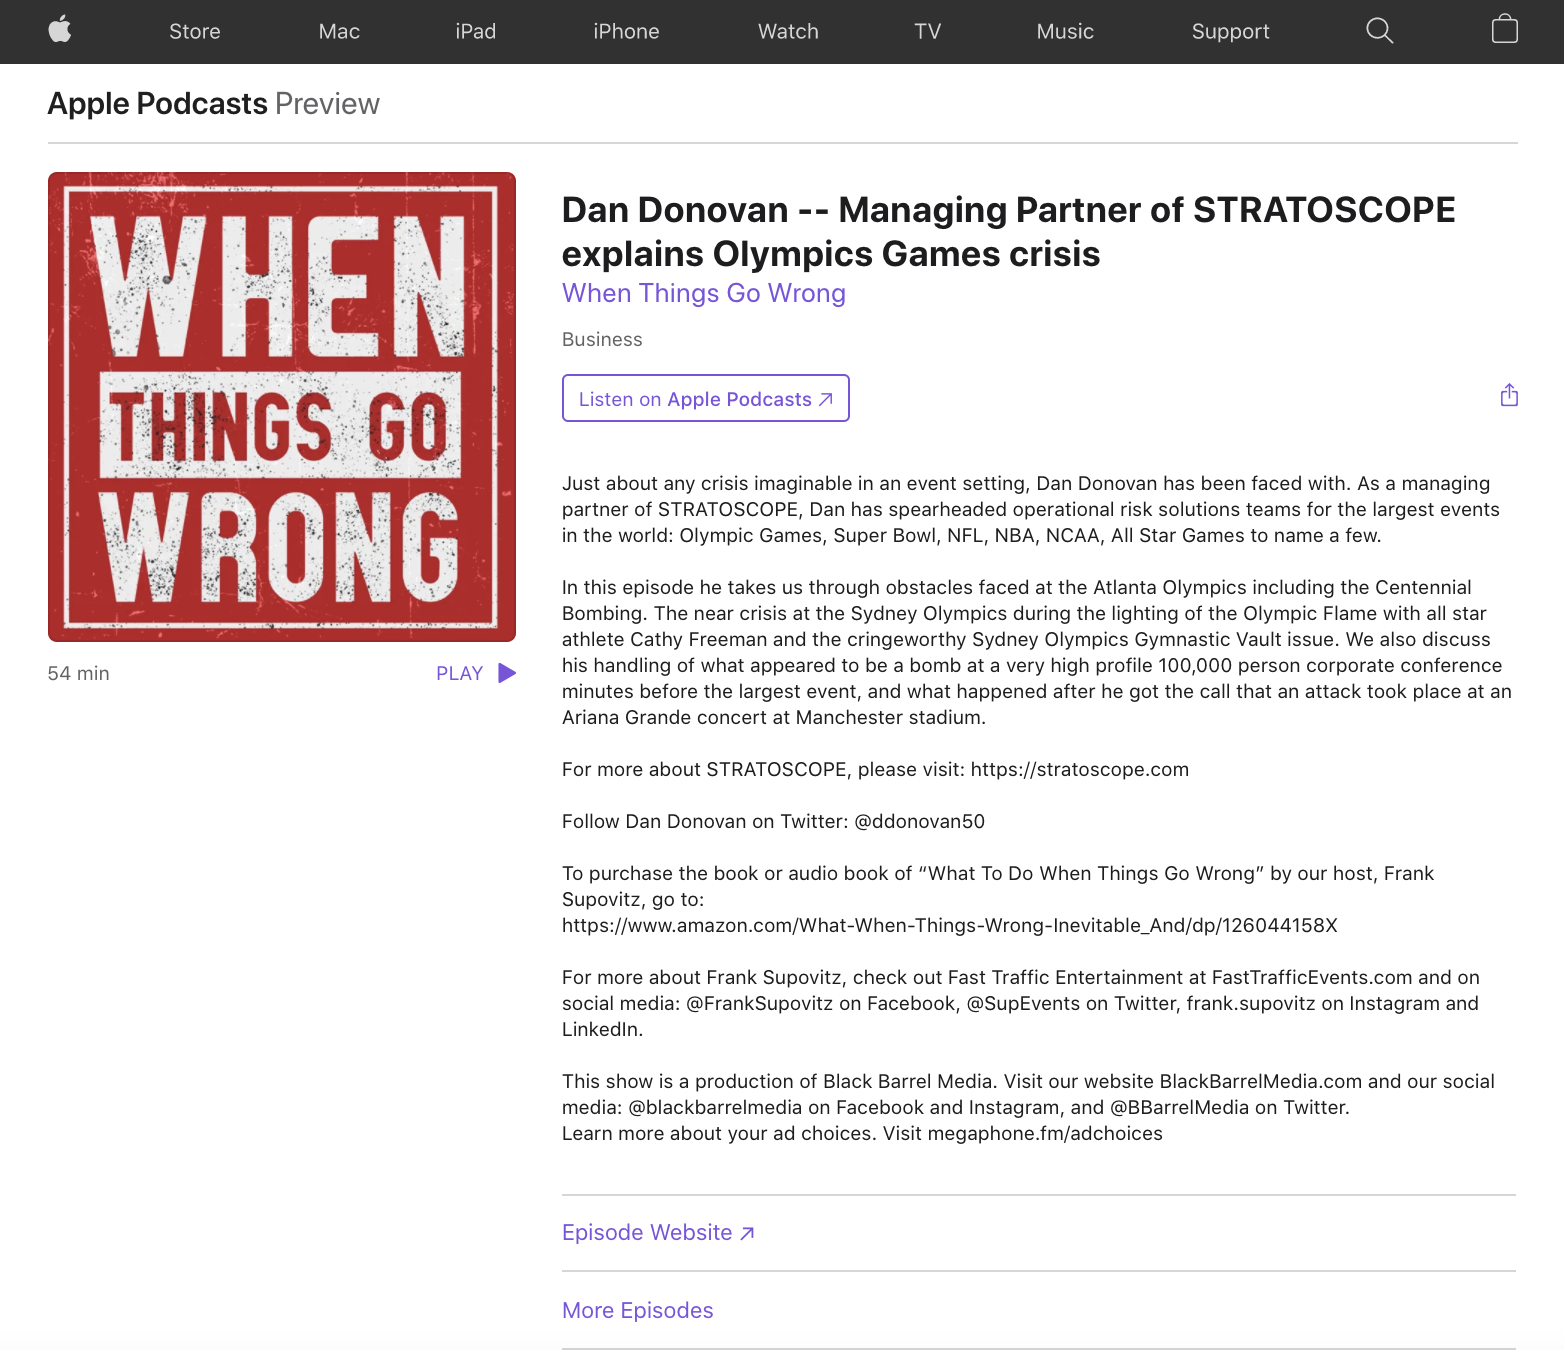 When Things Go Wrong podcast landing page